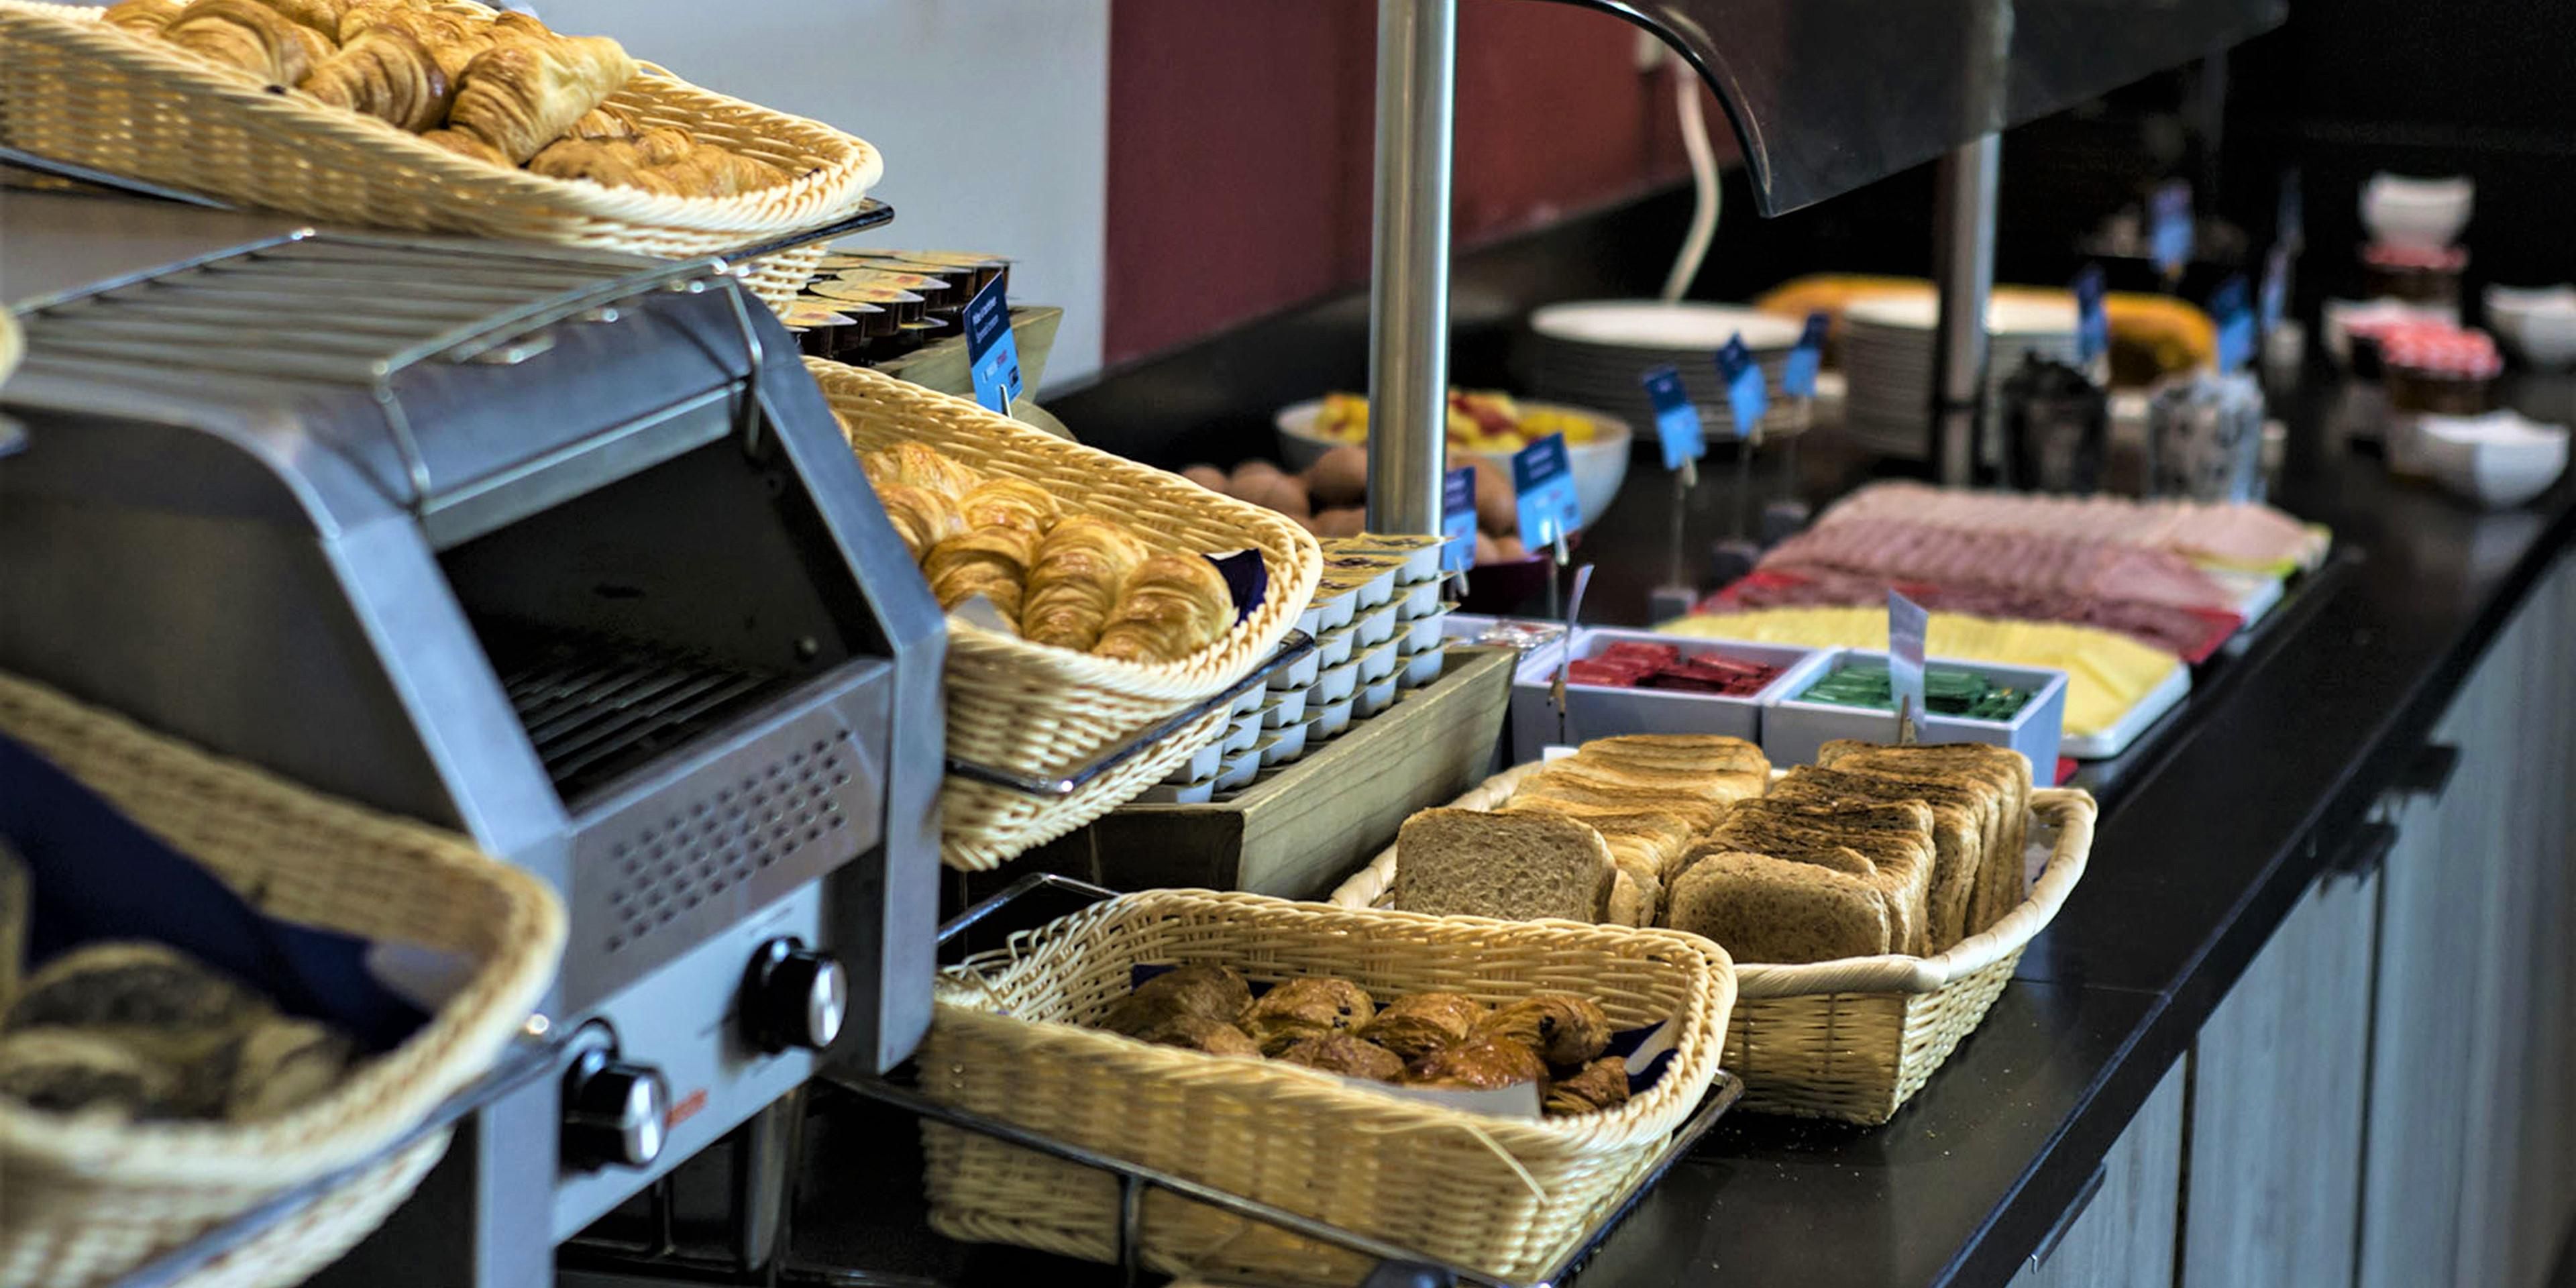 In order to guarantee a maximum level of hygiene, we have modified the functioning of our catering service served in the form of trays to be eaten in the room. With a wide selection of bread products, pastries, cereals, cheeses, yogurts and other cold meats, you start a nice day!